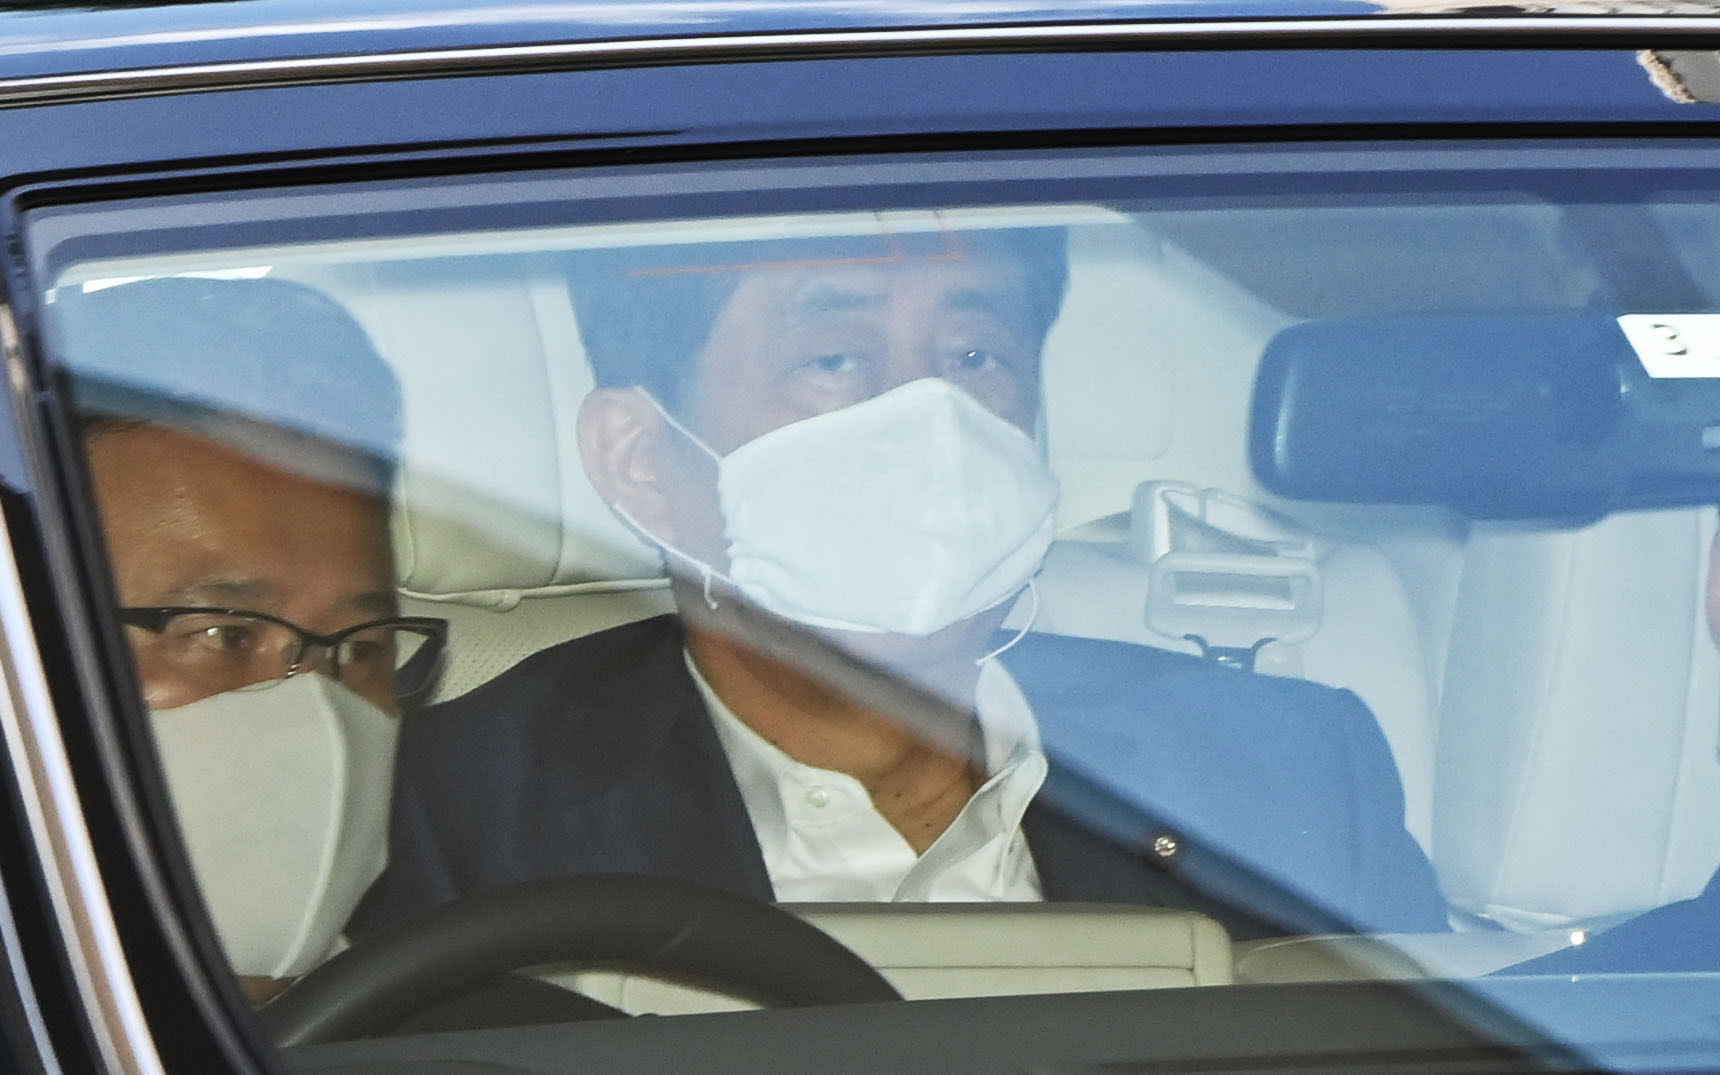 Japan’s Abe Returns To Hospital A Week After 7-Hour “Health Checkup”